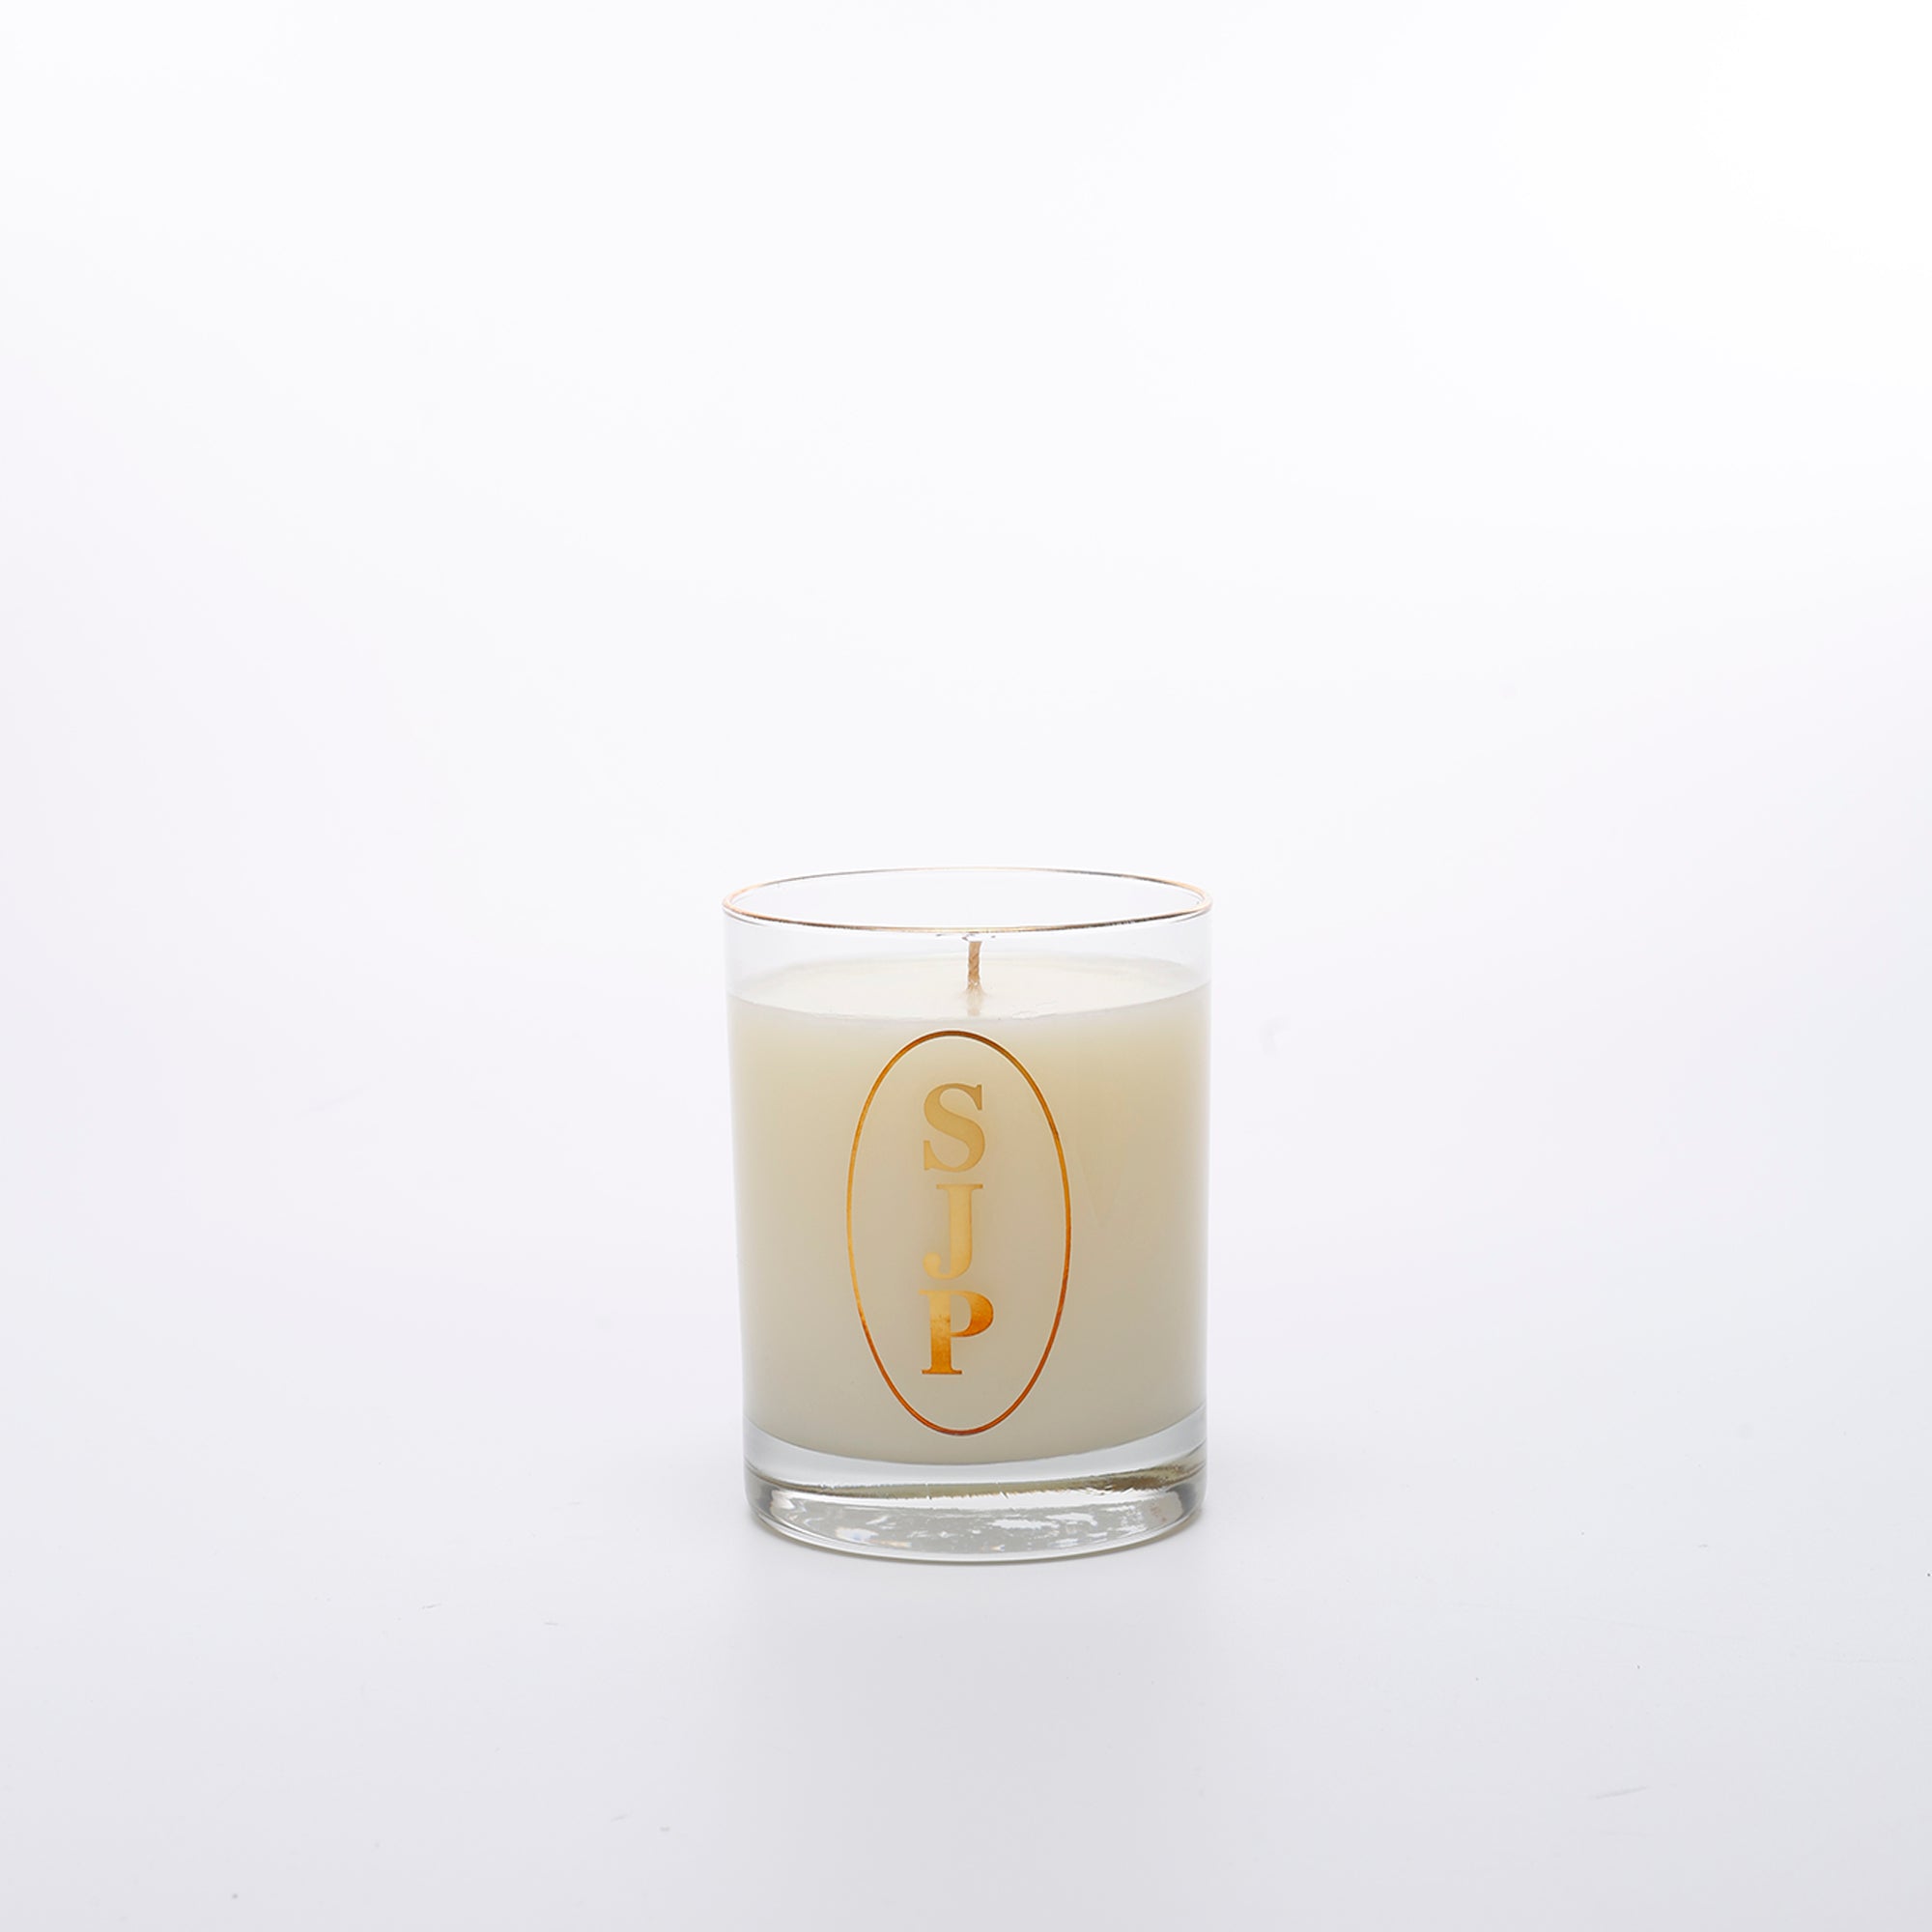 SJP by Sarah Jessica Parker Beige Fabric Candle